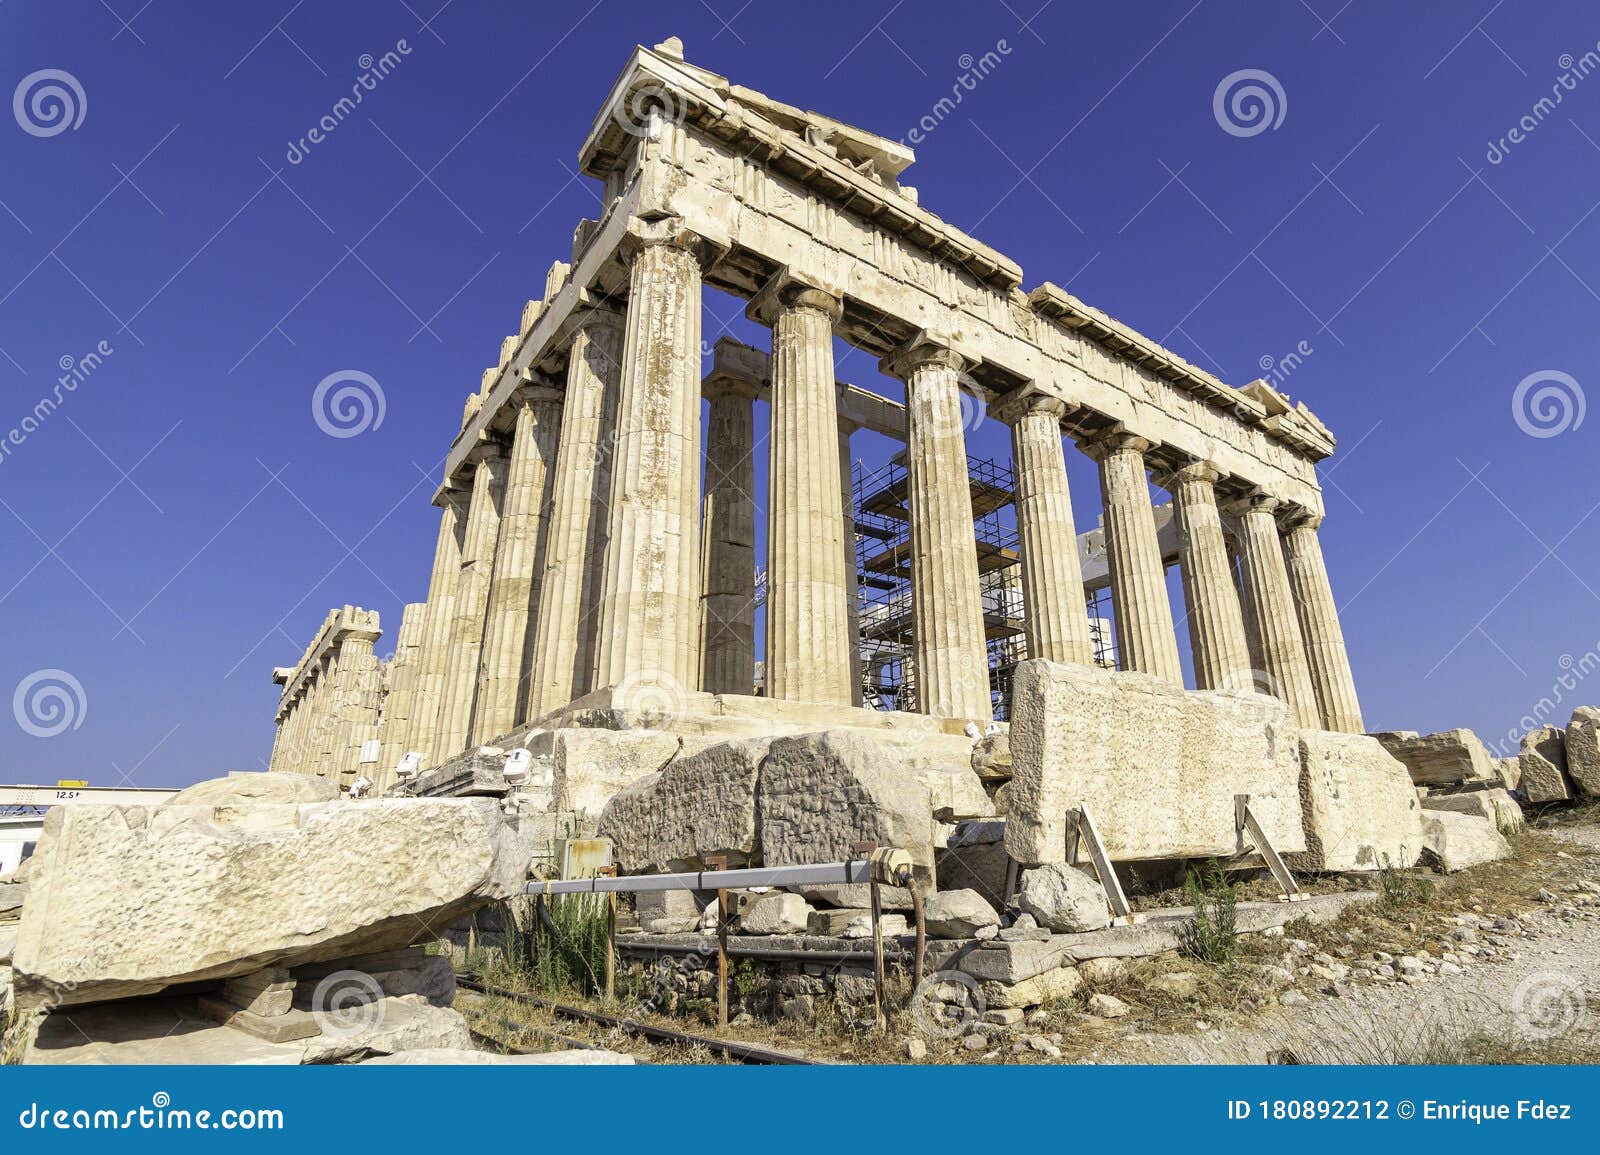 view of one of the sides of the facade of the partenon in athens, greece